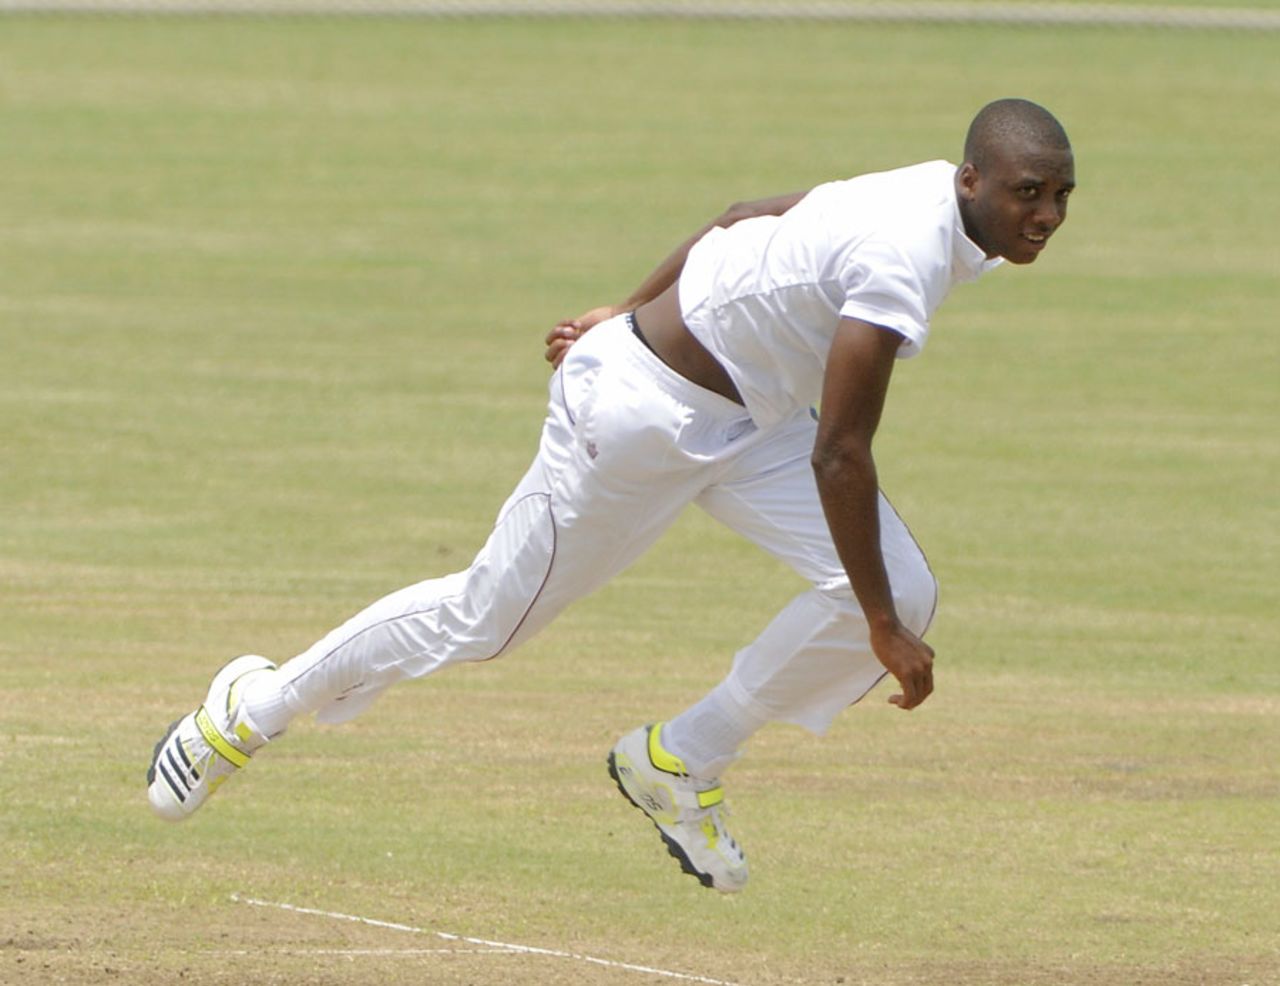 Miguel Cummins picked up 4 wickets for 74 runs, West Indies A v Sri Lanka A, 2nd unofficial Test, 1st day, Kingstown, June 12, 2013